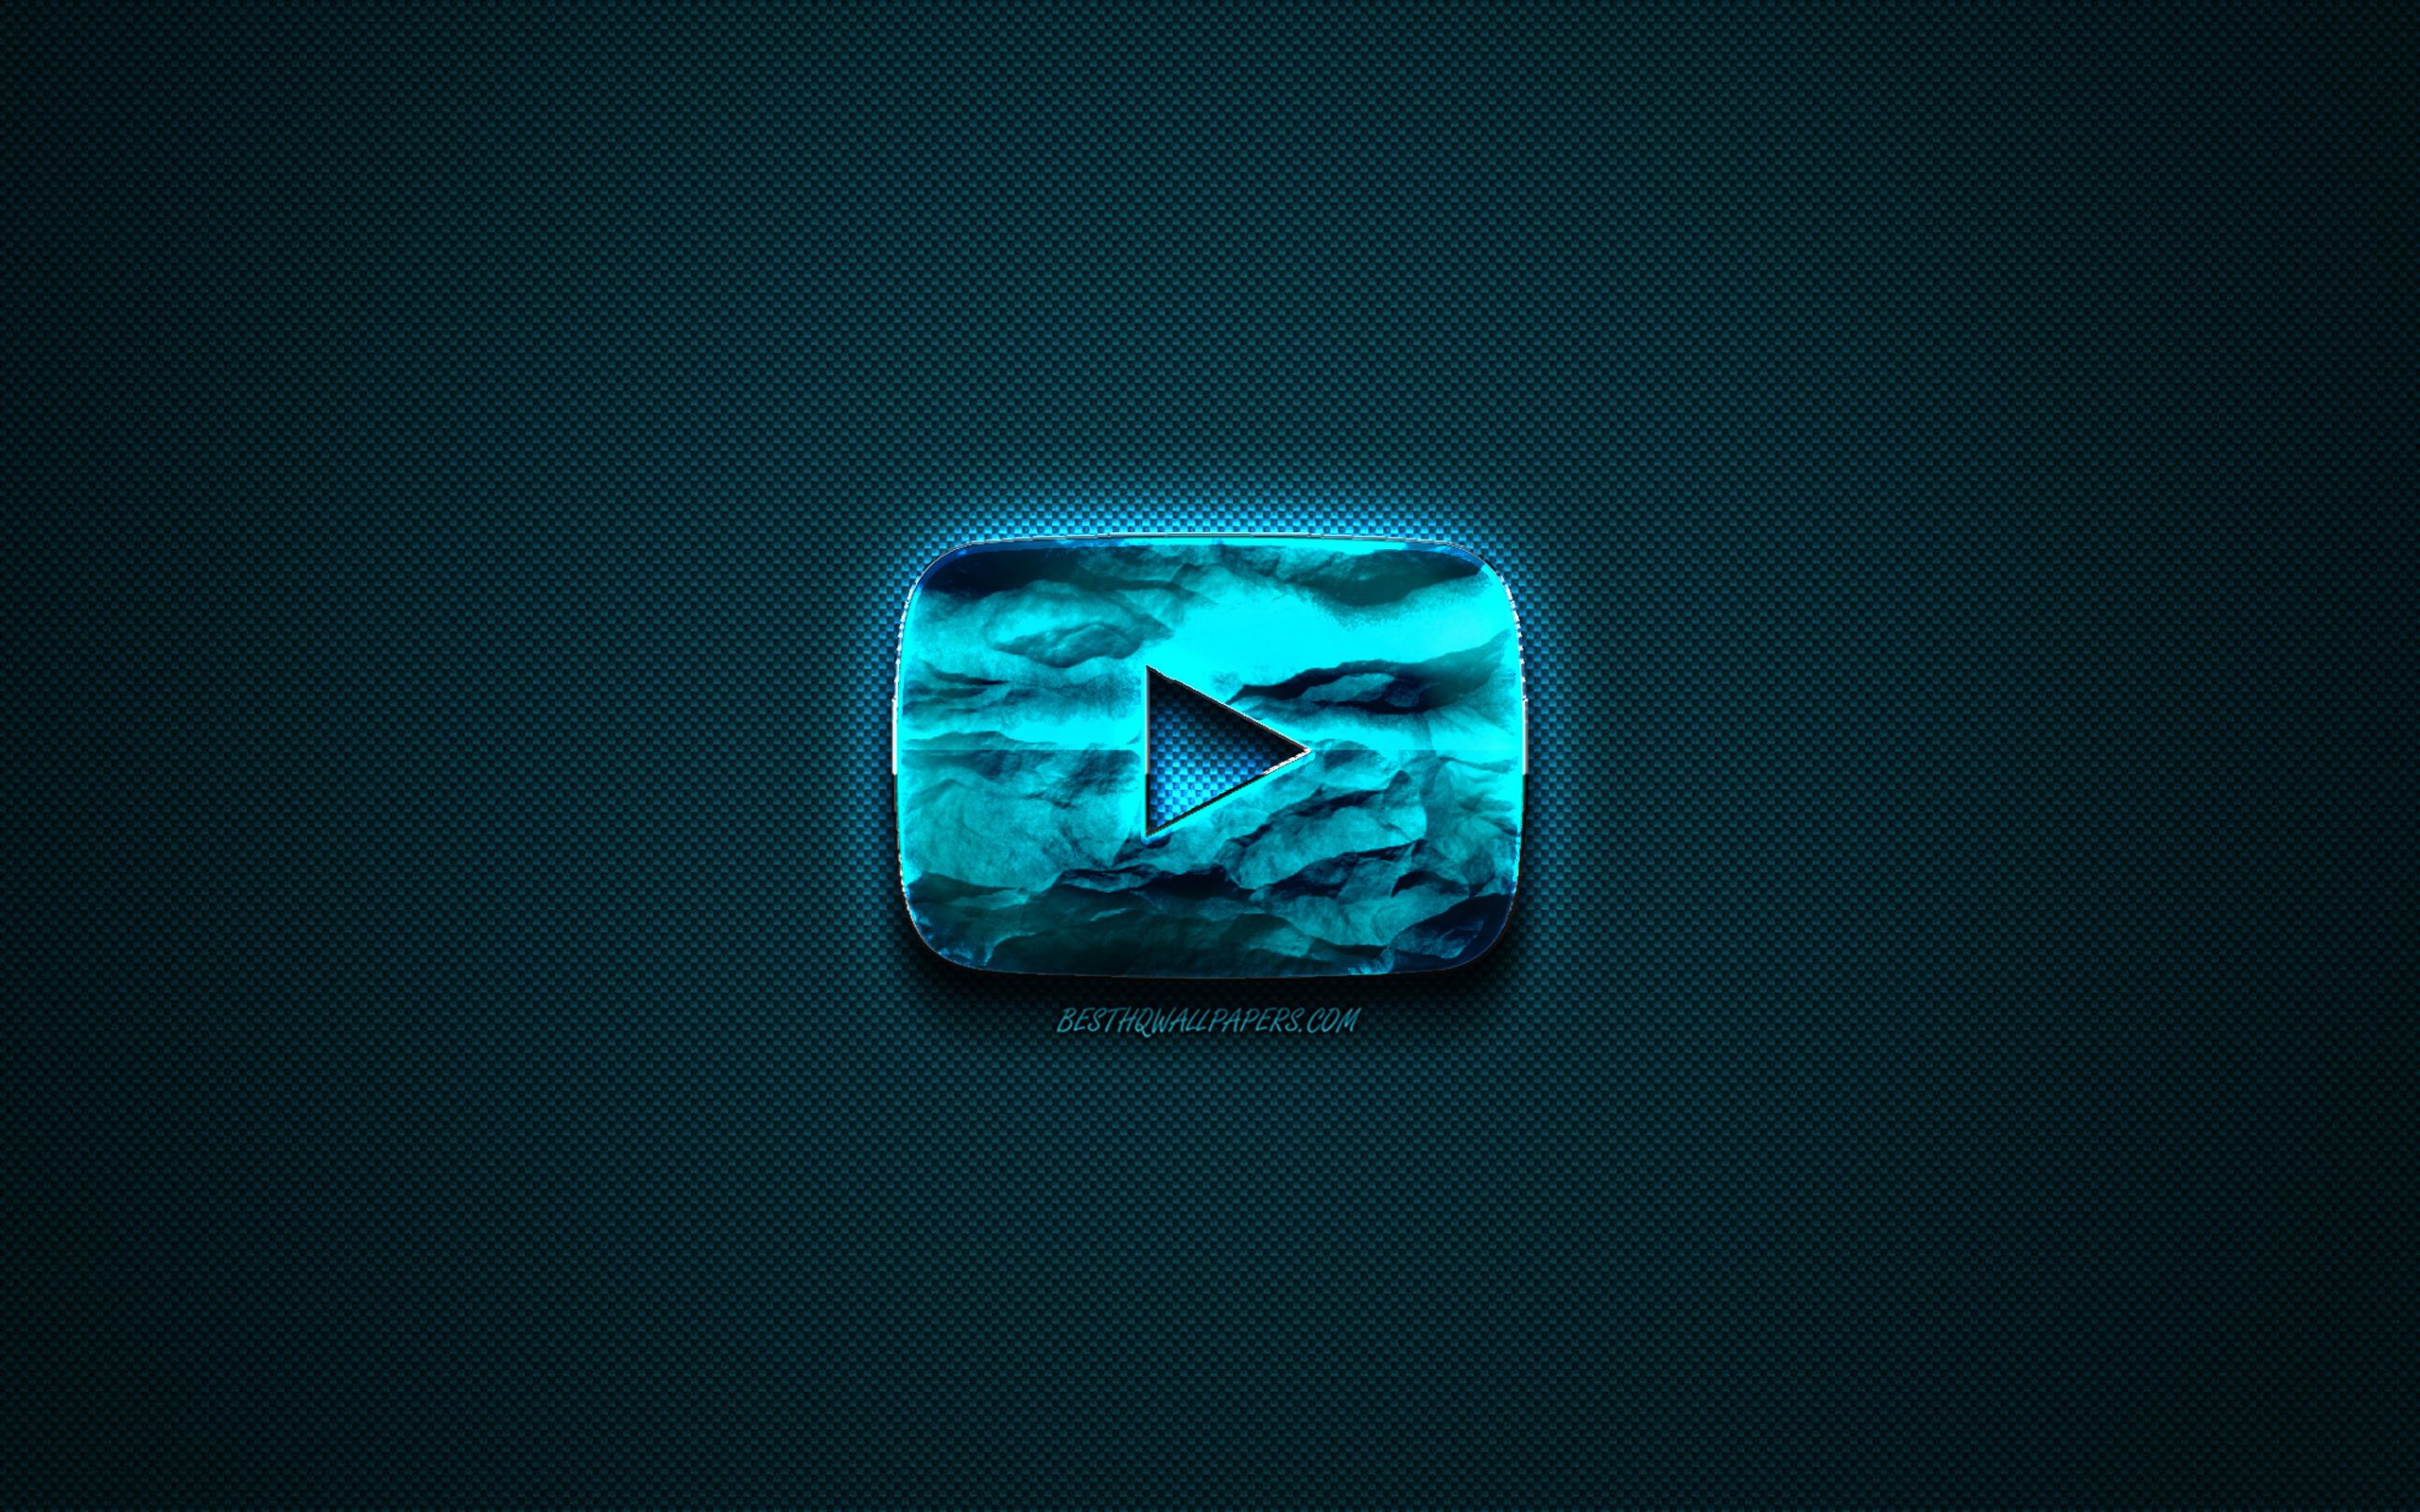 Youtube Channel Logo Wallpapers - Wallpaper Cave